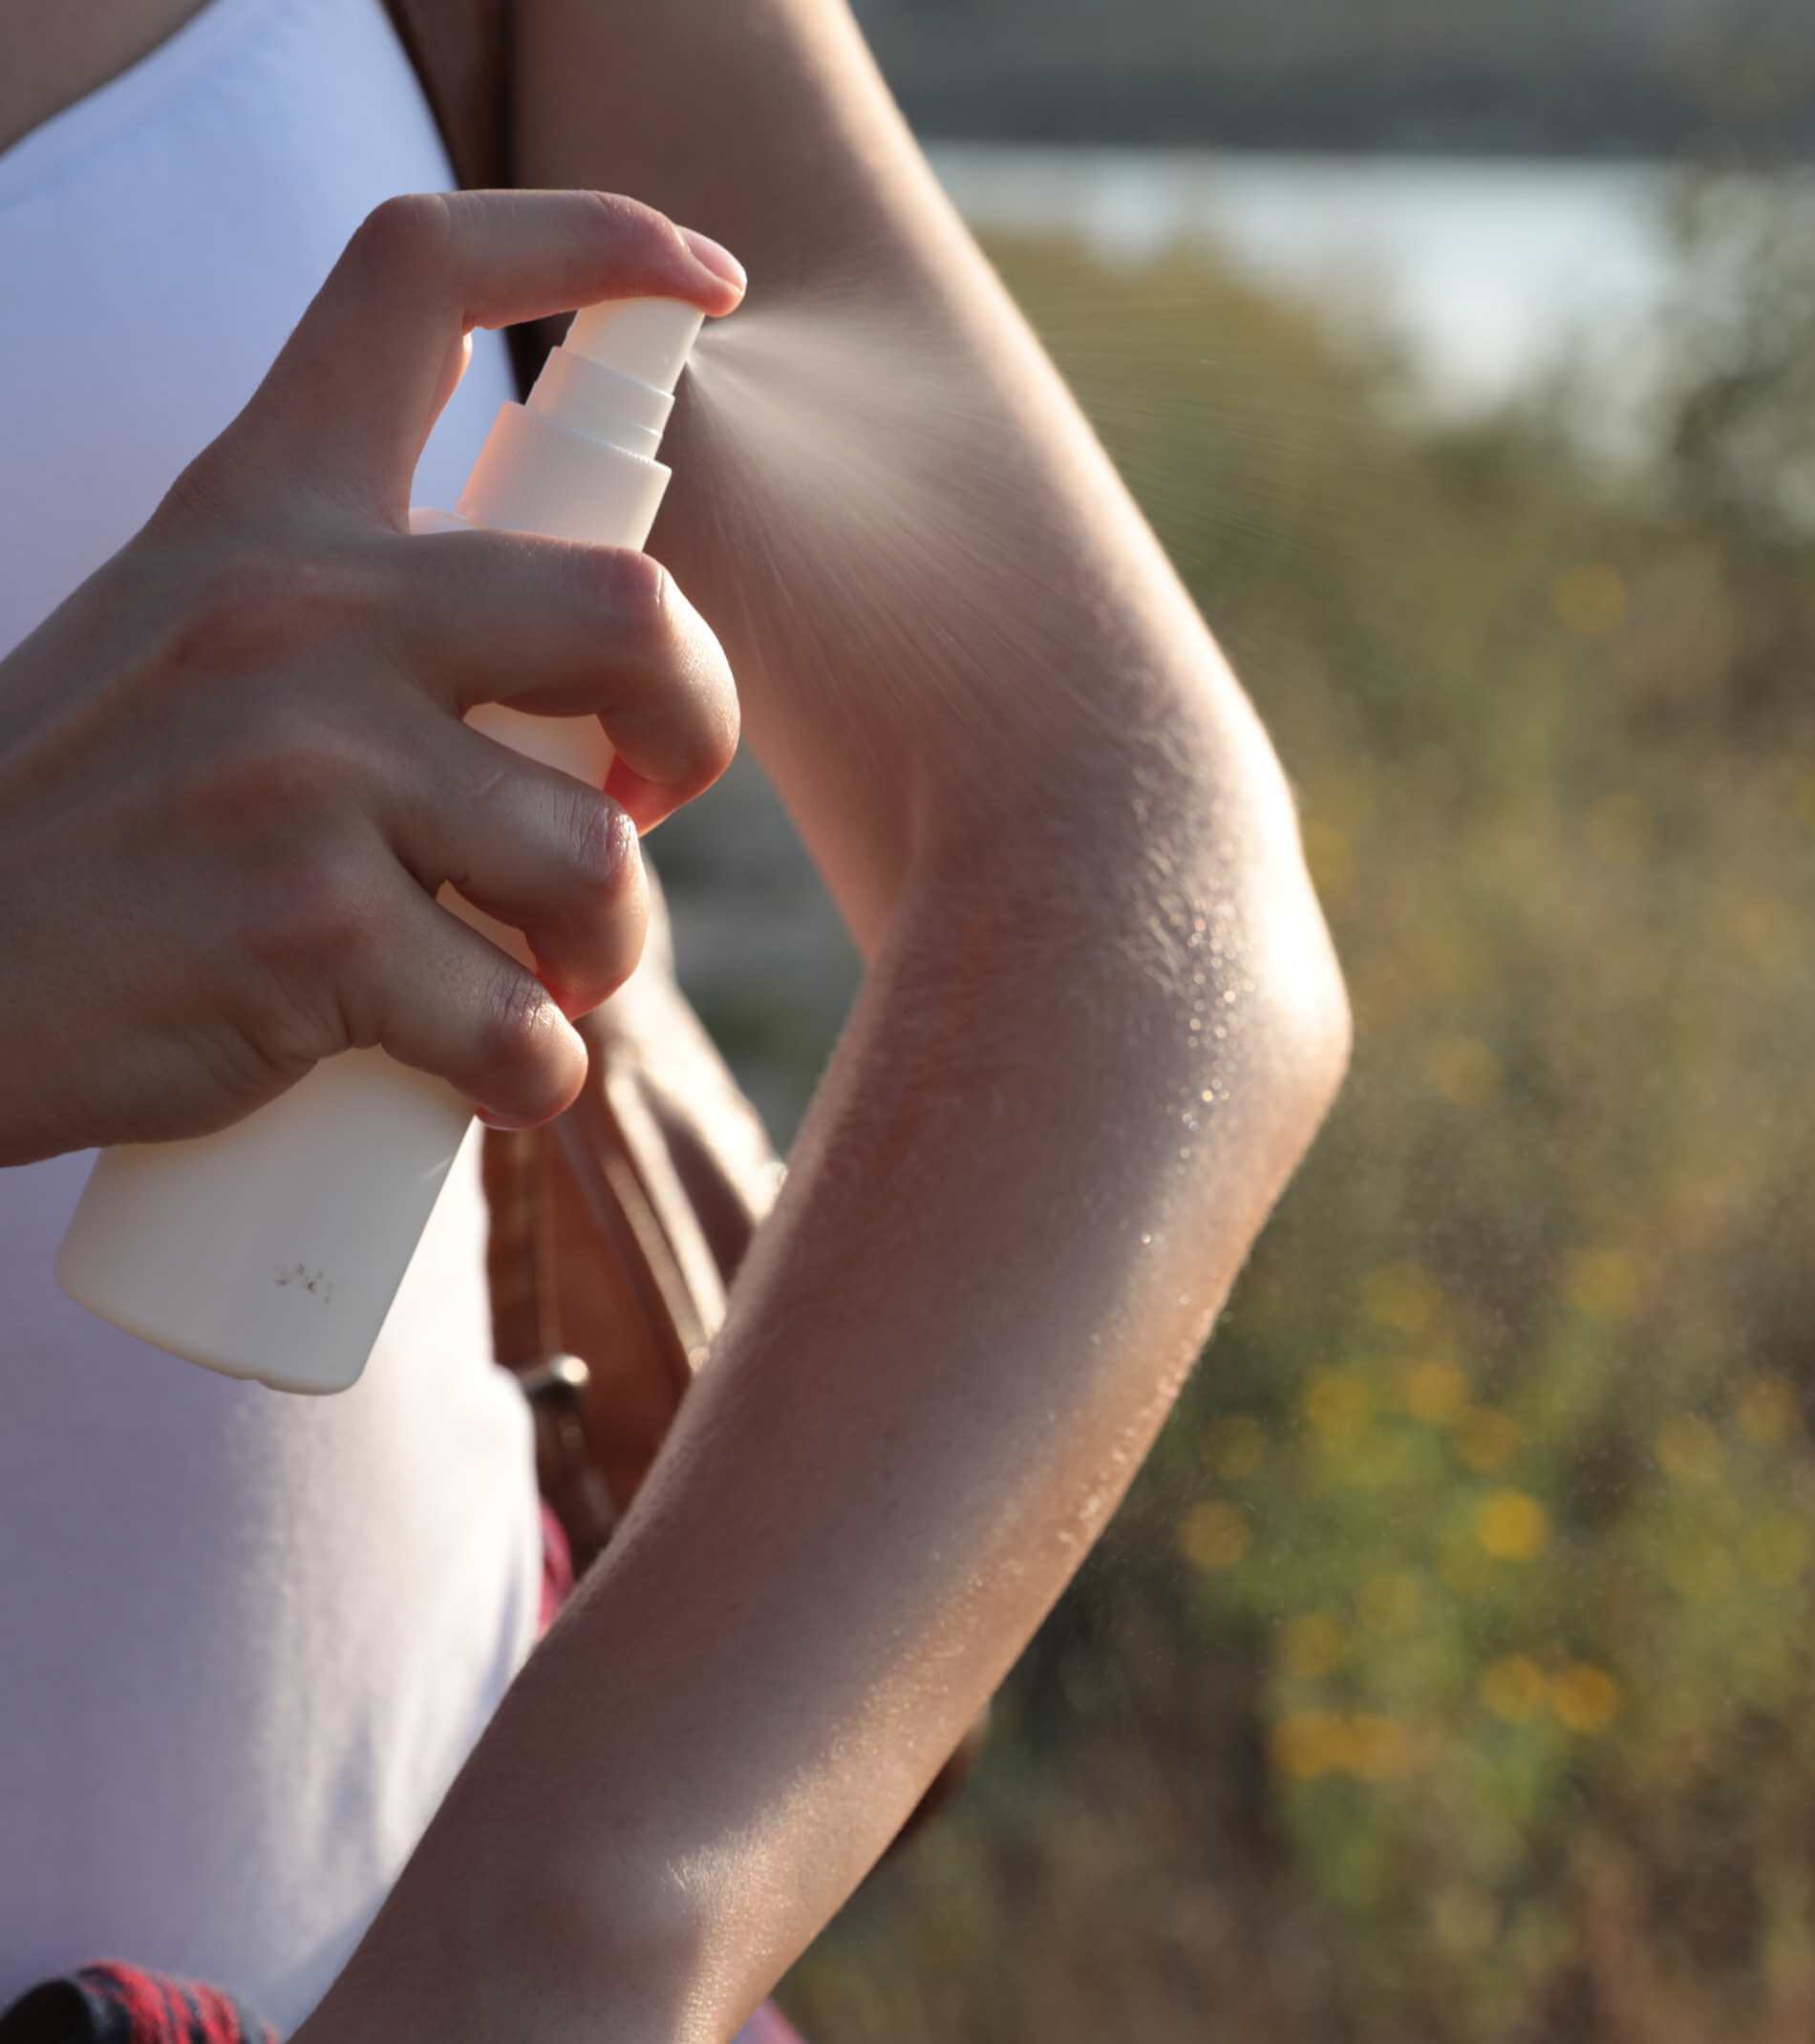 Woman applying insect repellent onto arm outdoors, closeup. Space for text